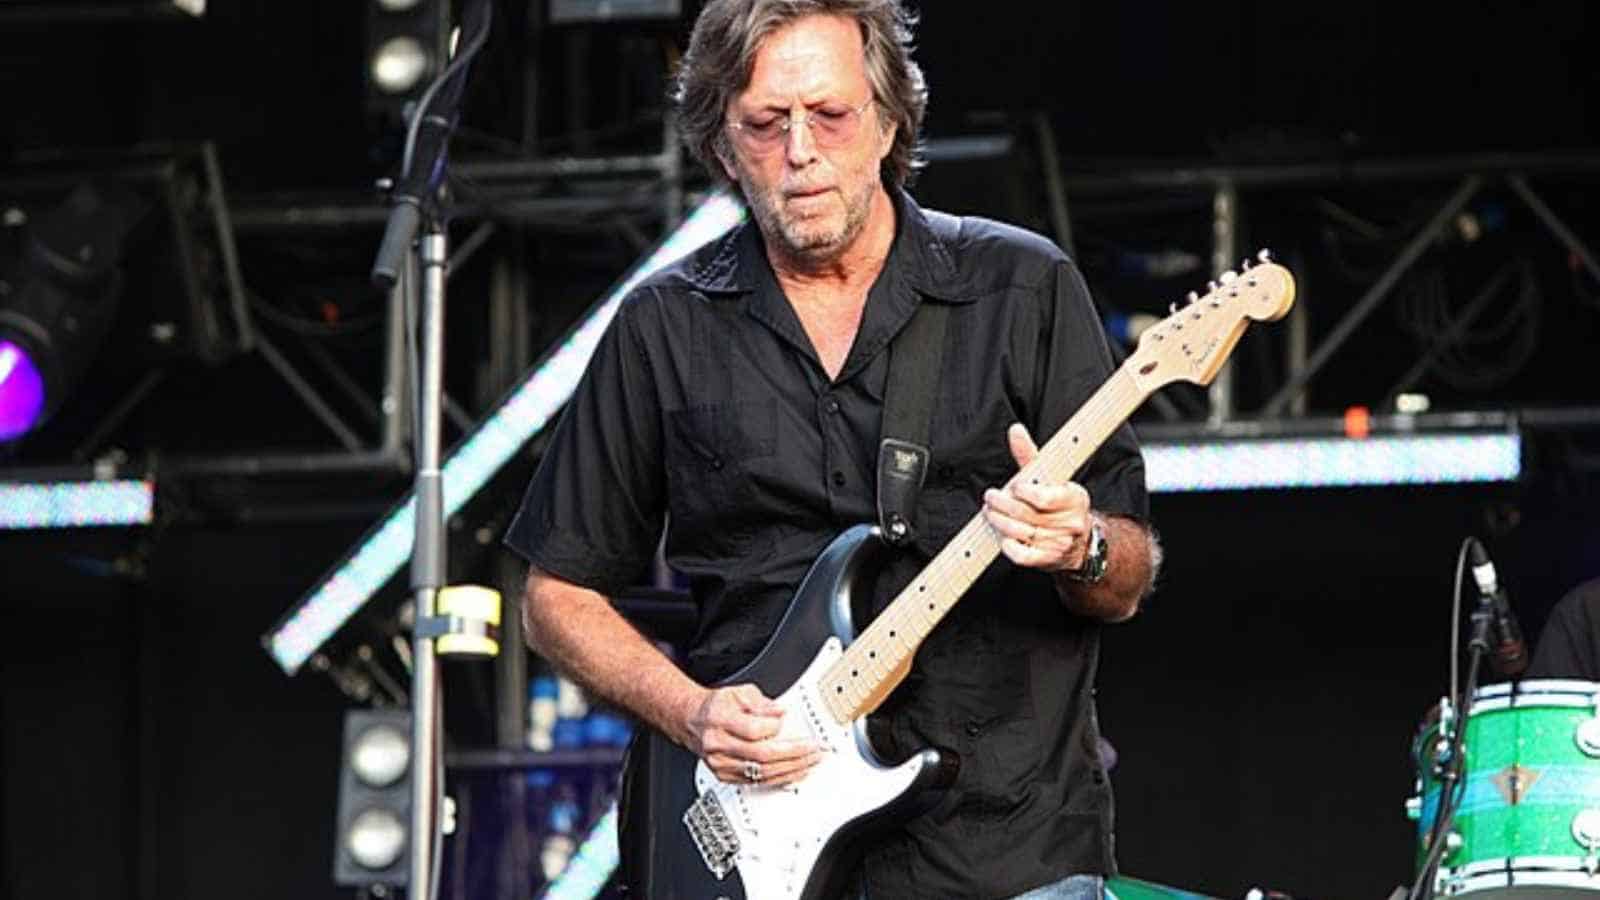 <p>Eric Clapton’s “Wonderful Tonight” is a beautiful love ballad that captures the essence of being in love. The lyrics take us on a journey through a perfect evening spent with someone special, painting a picture of pure bliss and contentment.</p><p>But what truly stands out in this timeless classic is Clapton’s heartfelt declaration of love for his then-wife, Pattie Boyd. Each line is filled with genuine emotion and love, making it a truly romantic tribute to their relationship.</p>